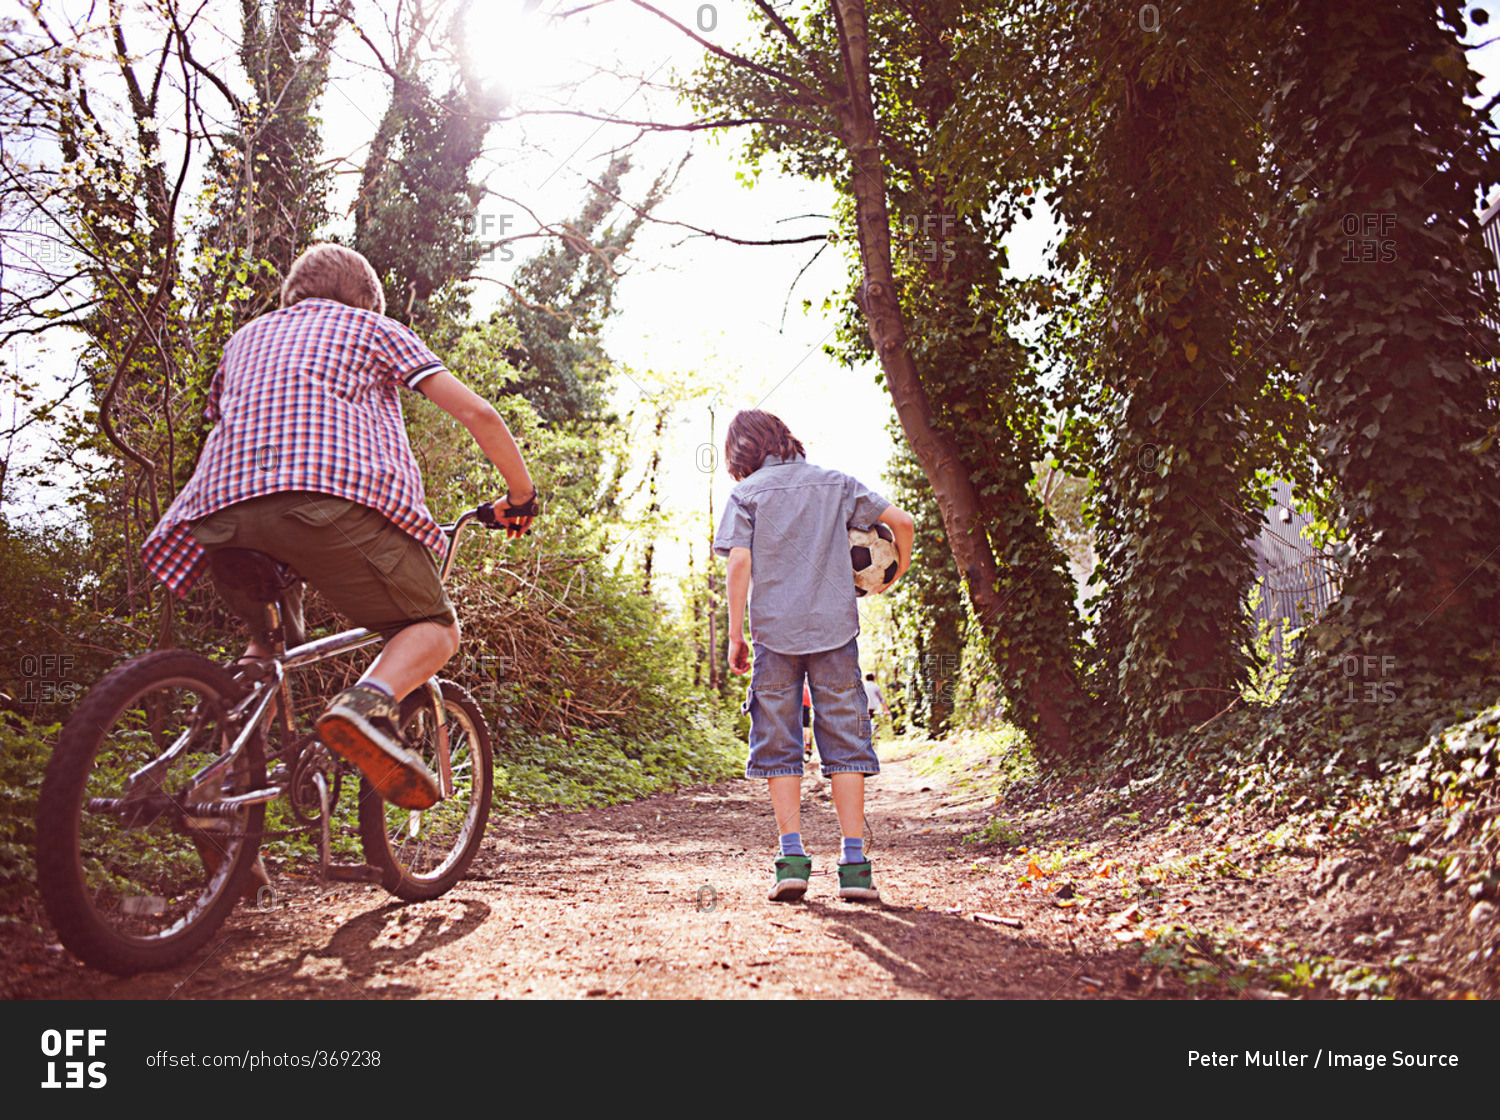 Rear view of a boy on bike with friend on forest path